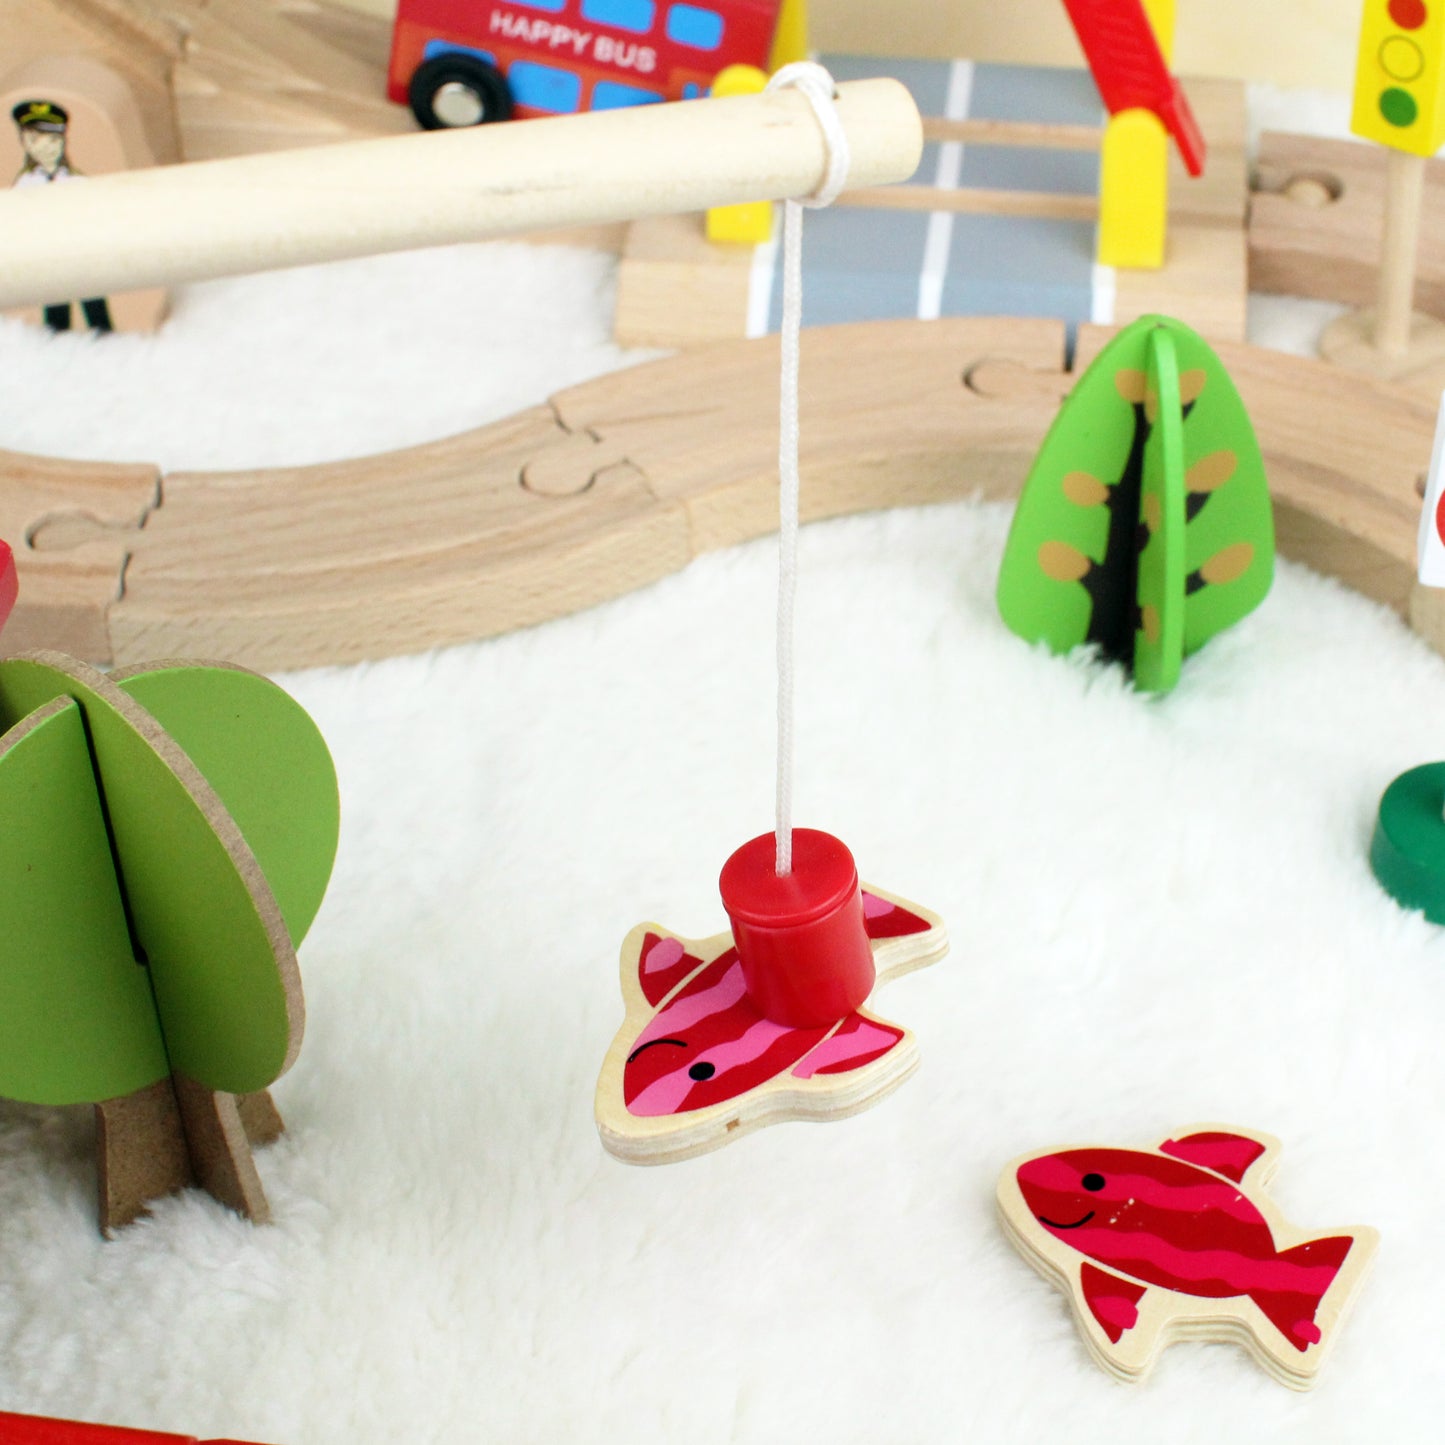 wooden train (station) toy set with bus, helicopter, trees, fishing, traffic lights